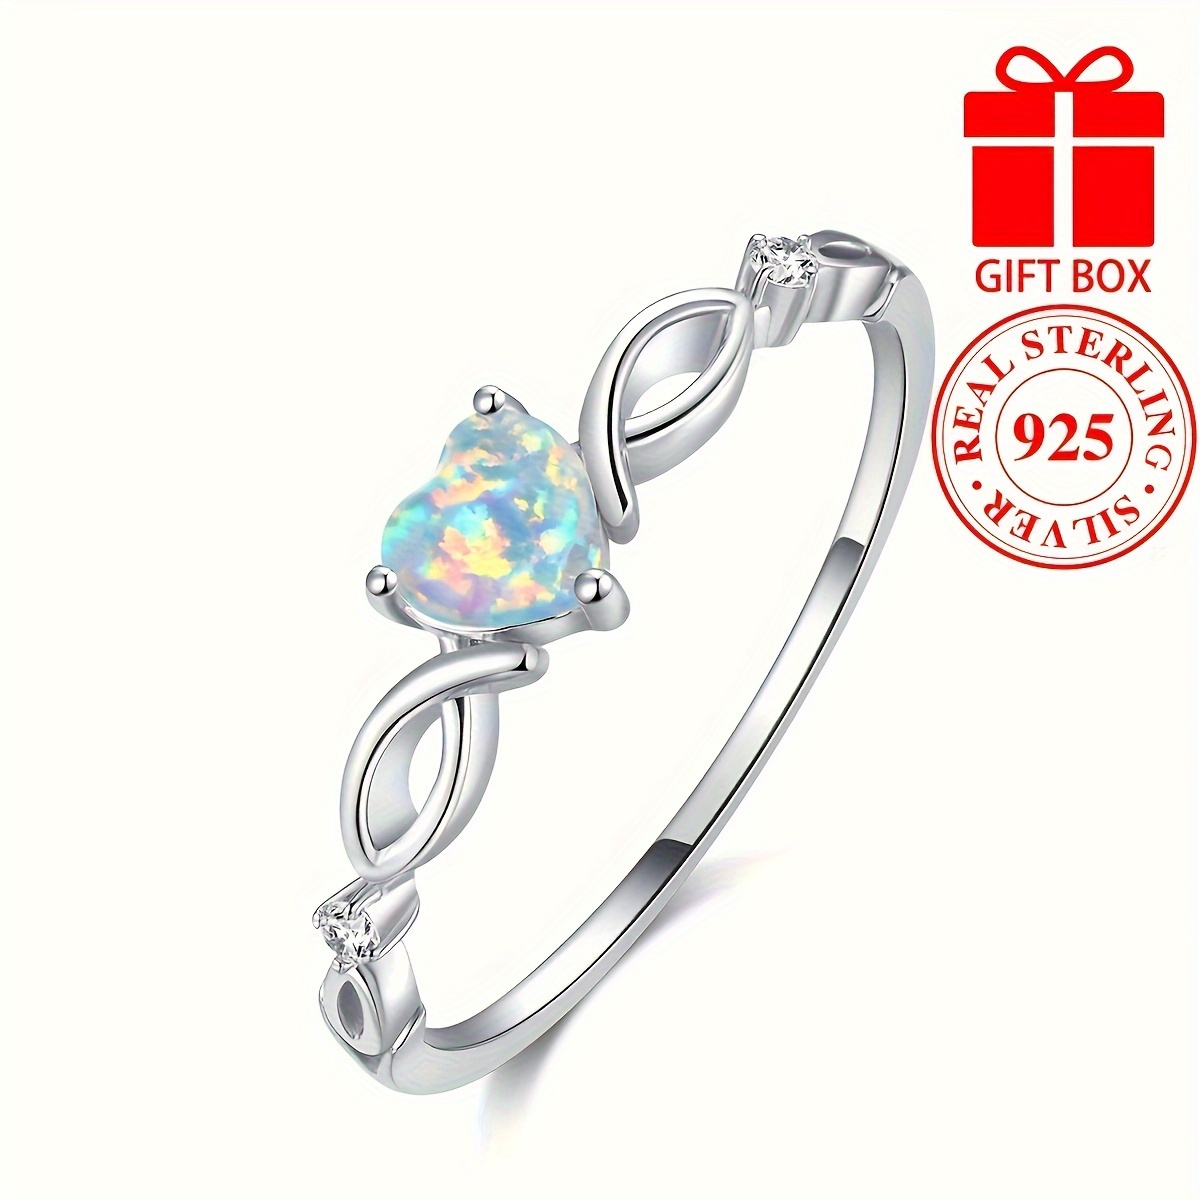 

925 Sterling Silver Ring Inlaid Opal In Heart Shape Symbol Of Beauty And Sweetness Engagement/ Wedding Ring High Quality Jewelry With Gift Box